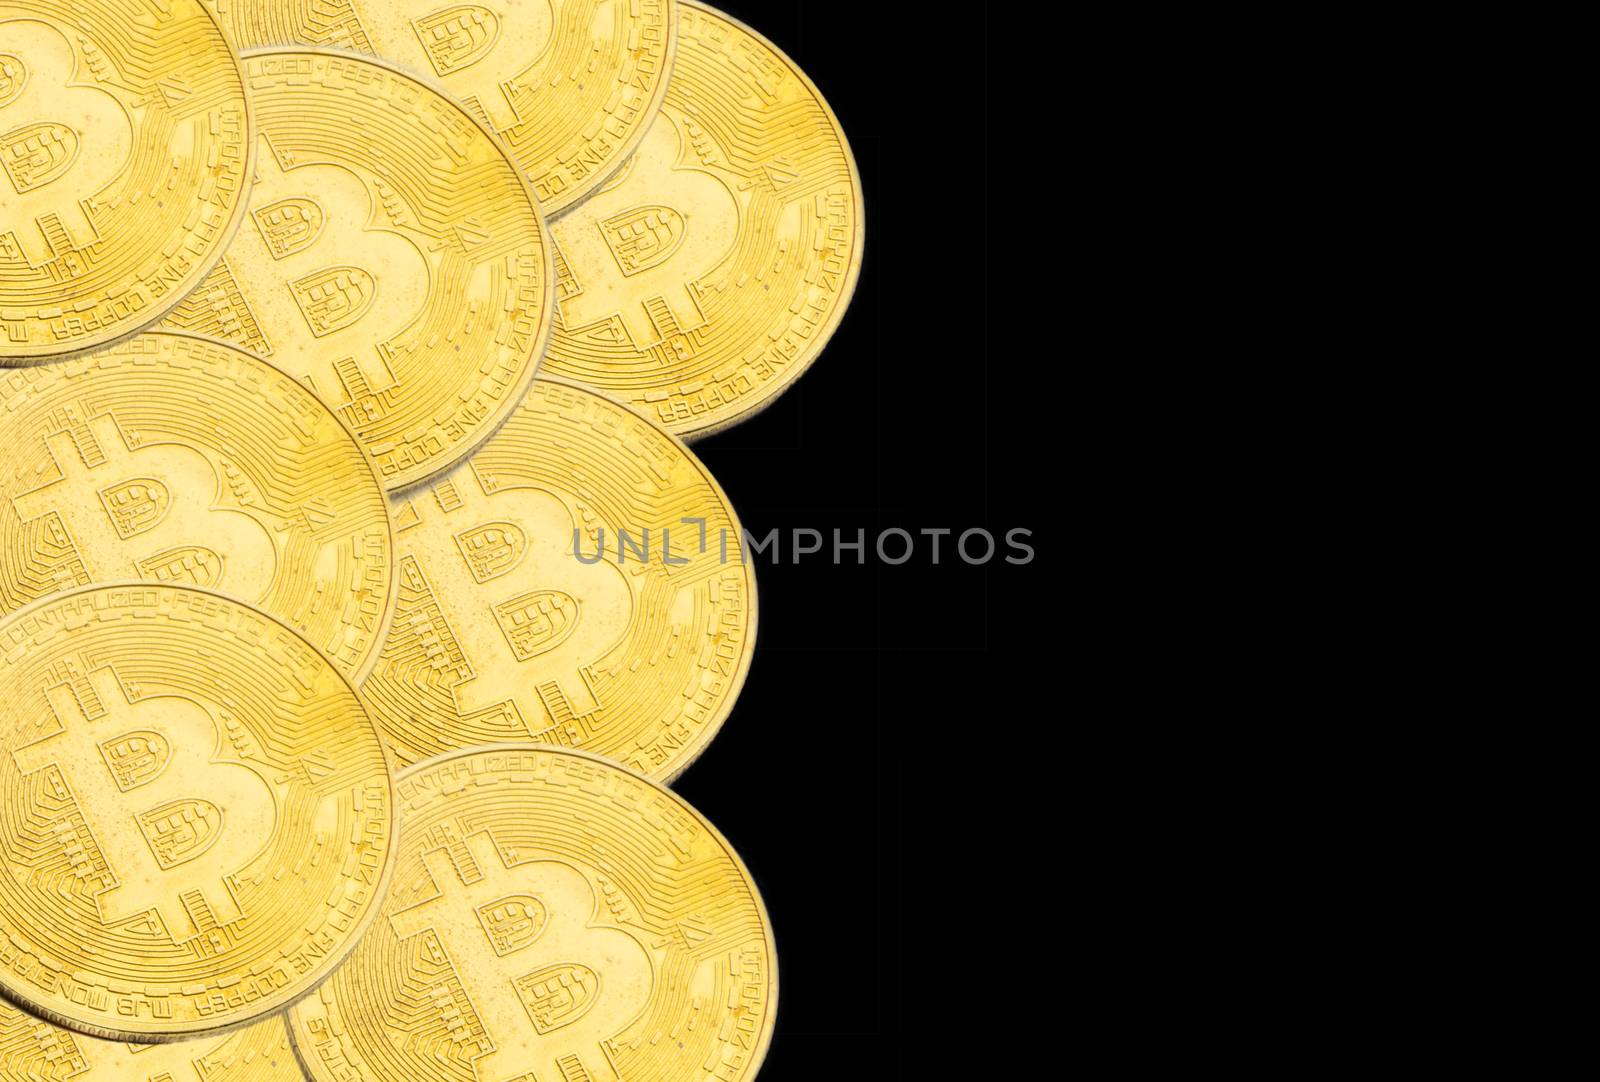 BITCOIN Cryptocurrency on black background by silverwings